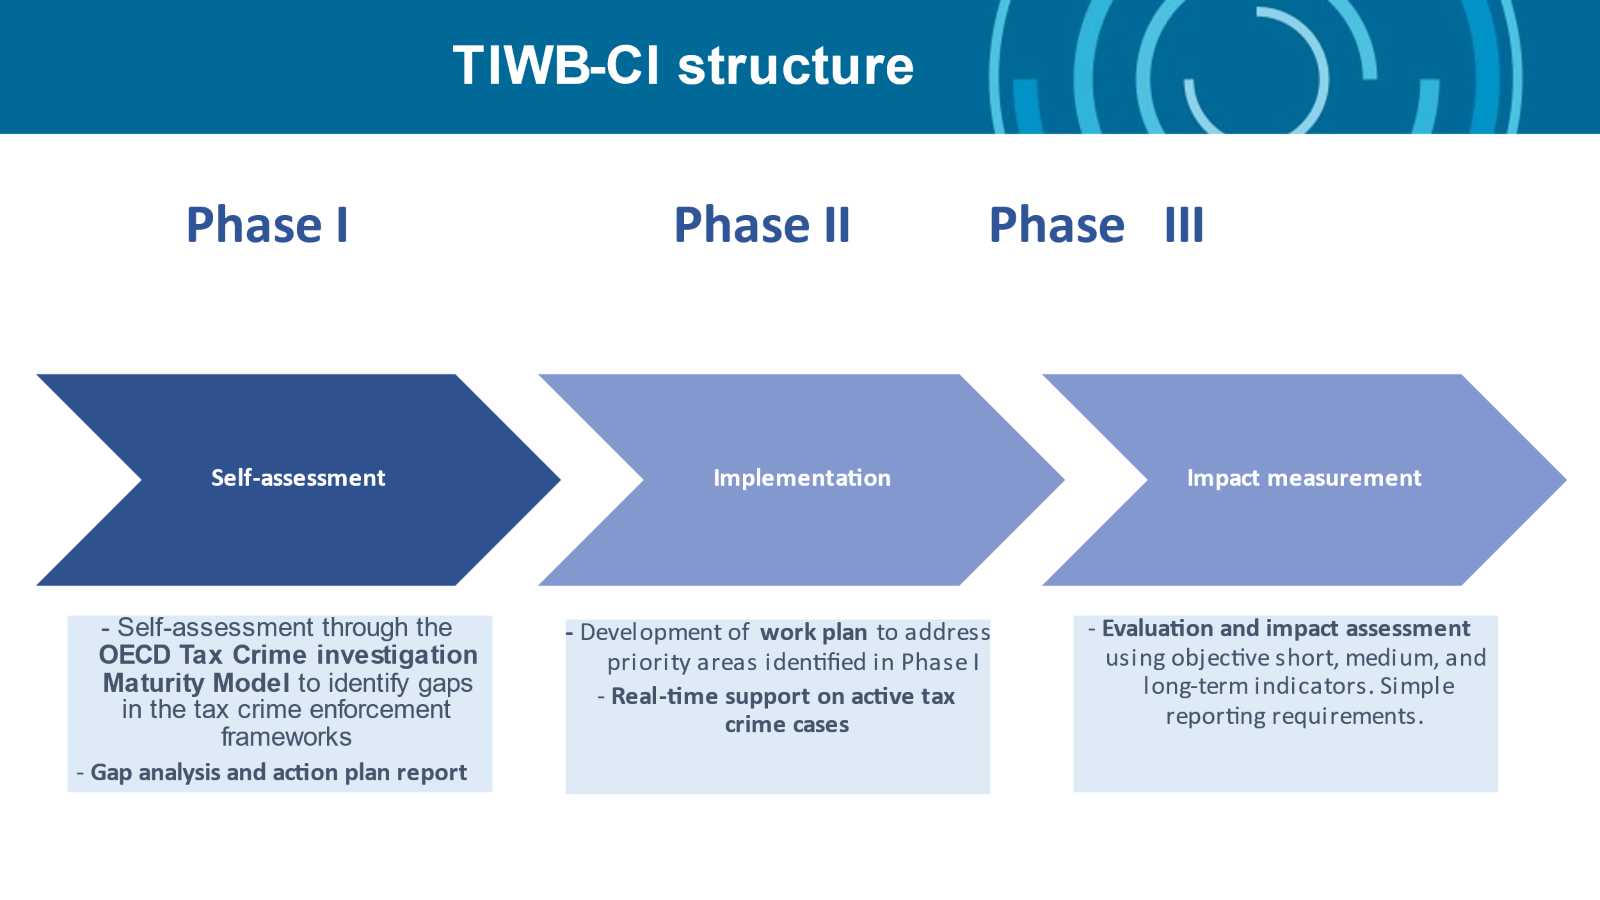 TWIB-CI structure : phase 1 self-assessment, phase 2 implementation, phase 3 impact measurement 